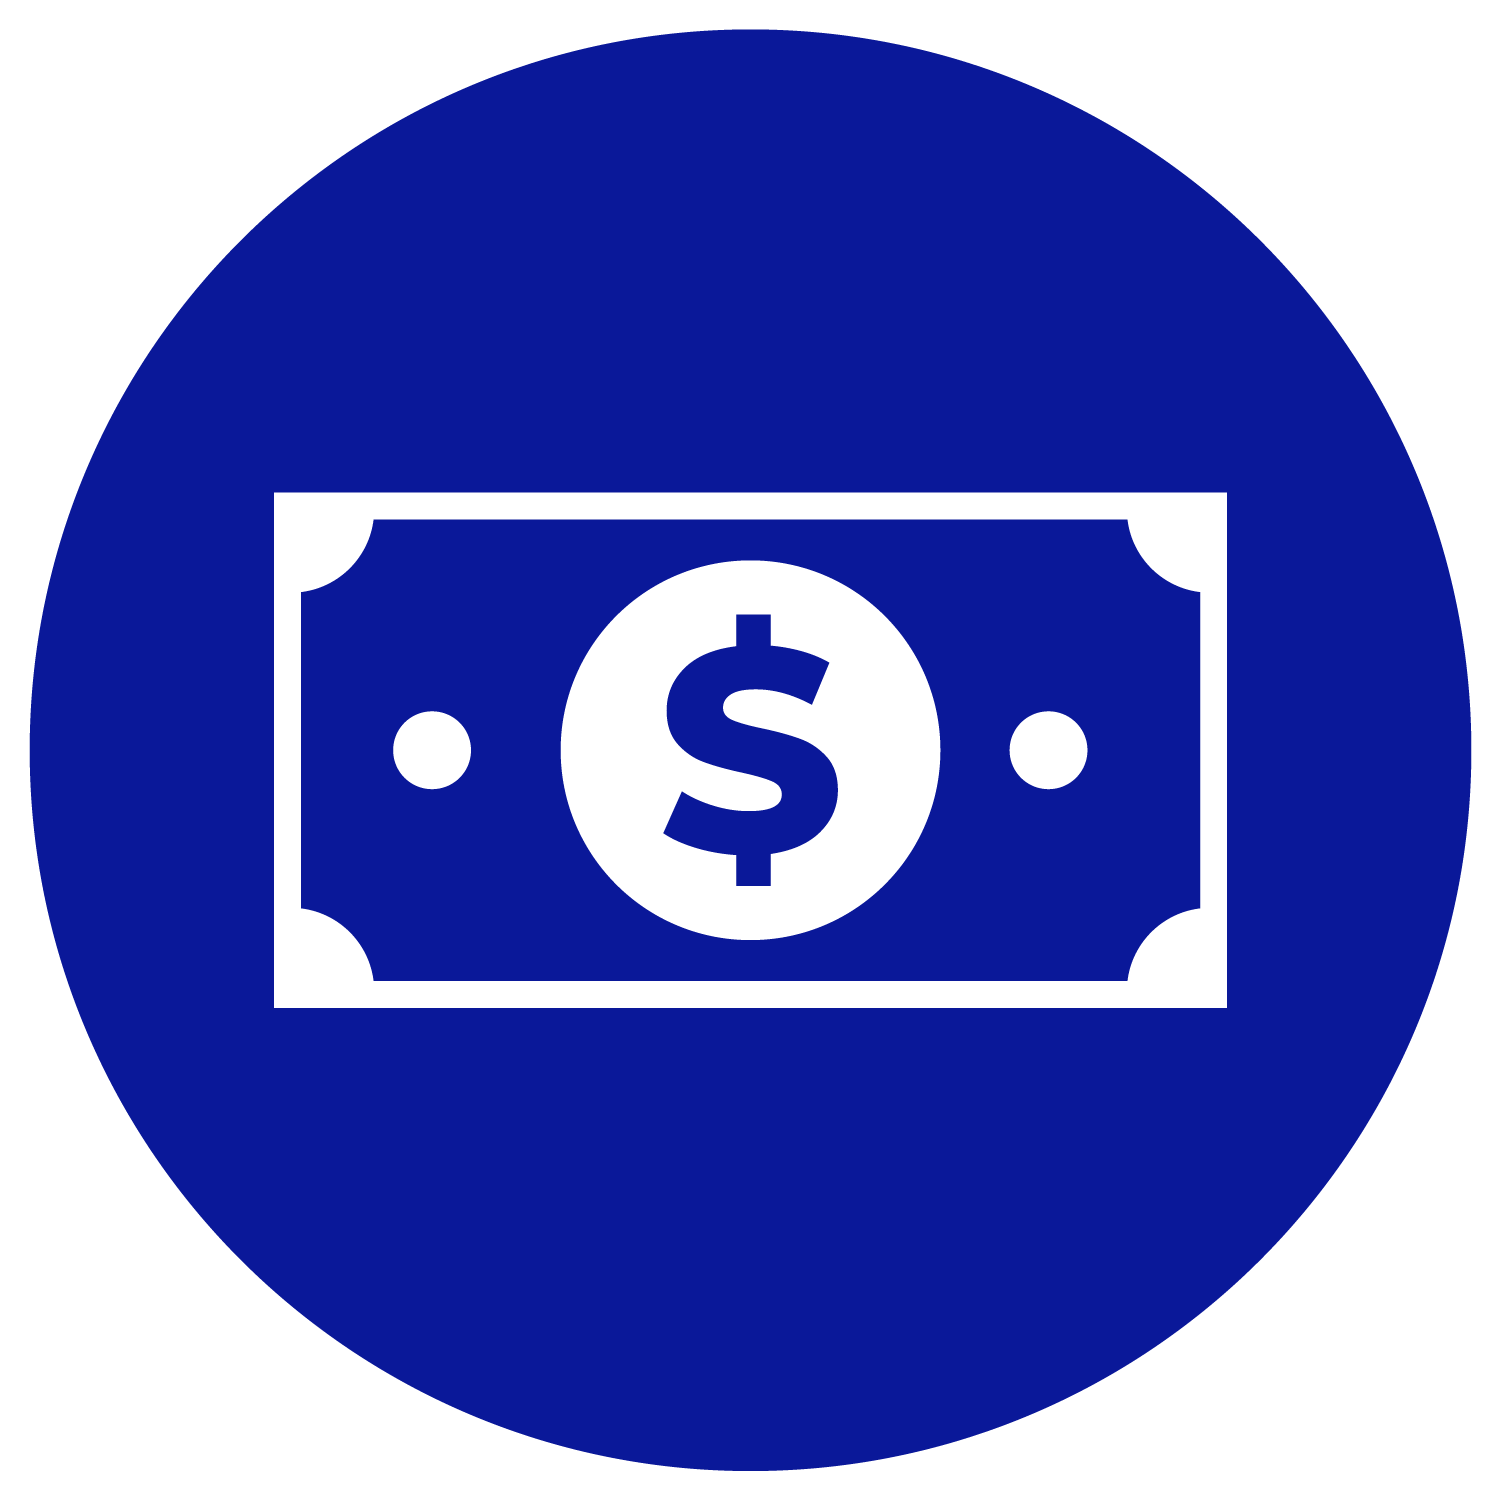 circular blue icon with a white, rectangular bill shape, featuring an inner white circle with a blue dollar sign